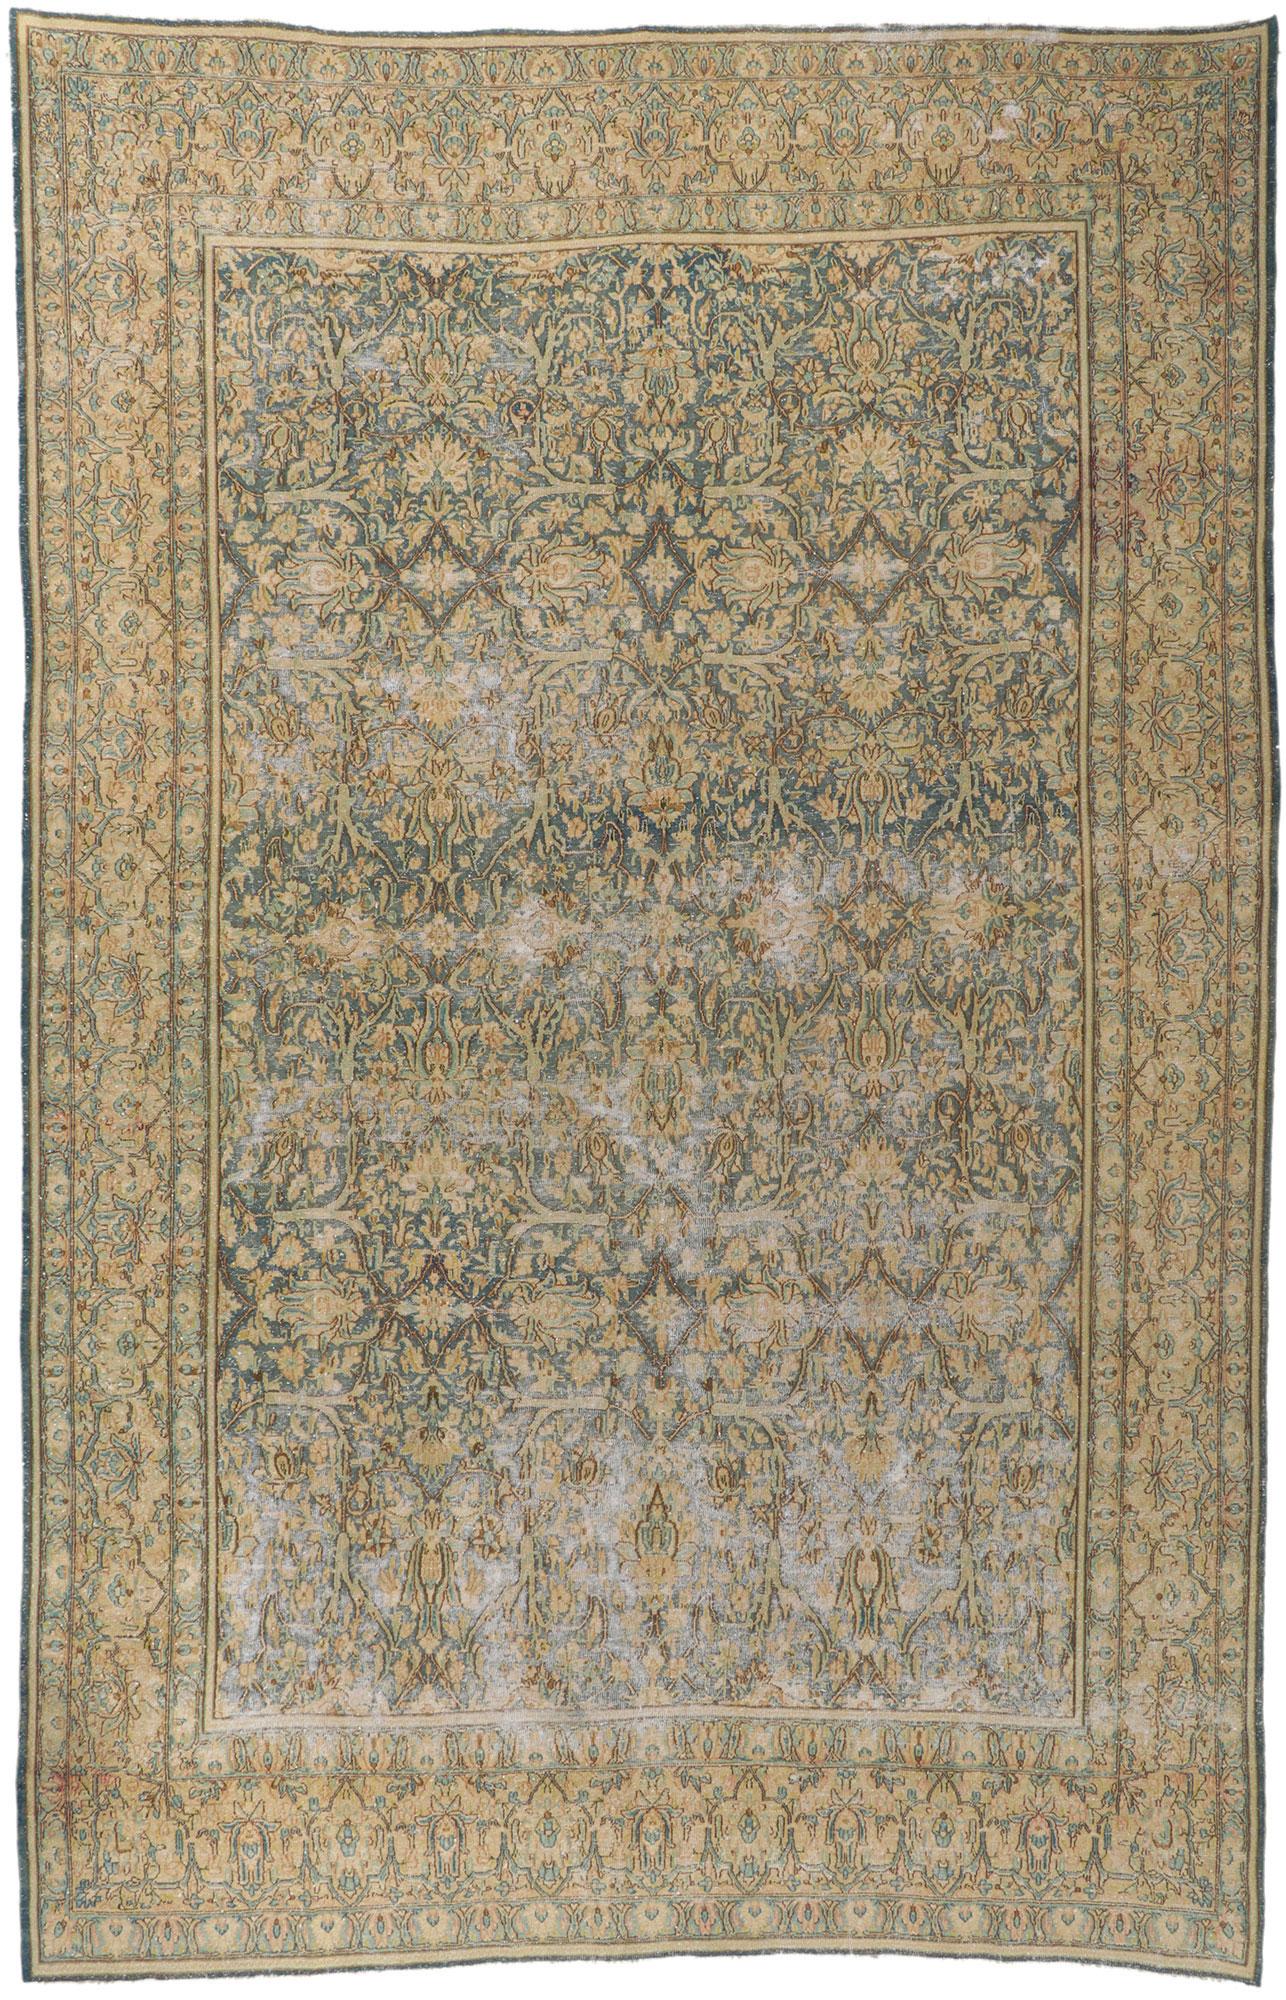 Antique-Worn Persian Kerman Rug, Rugged Beauty Meets Laid-Back Luxury For Sale 2